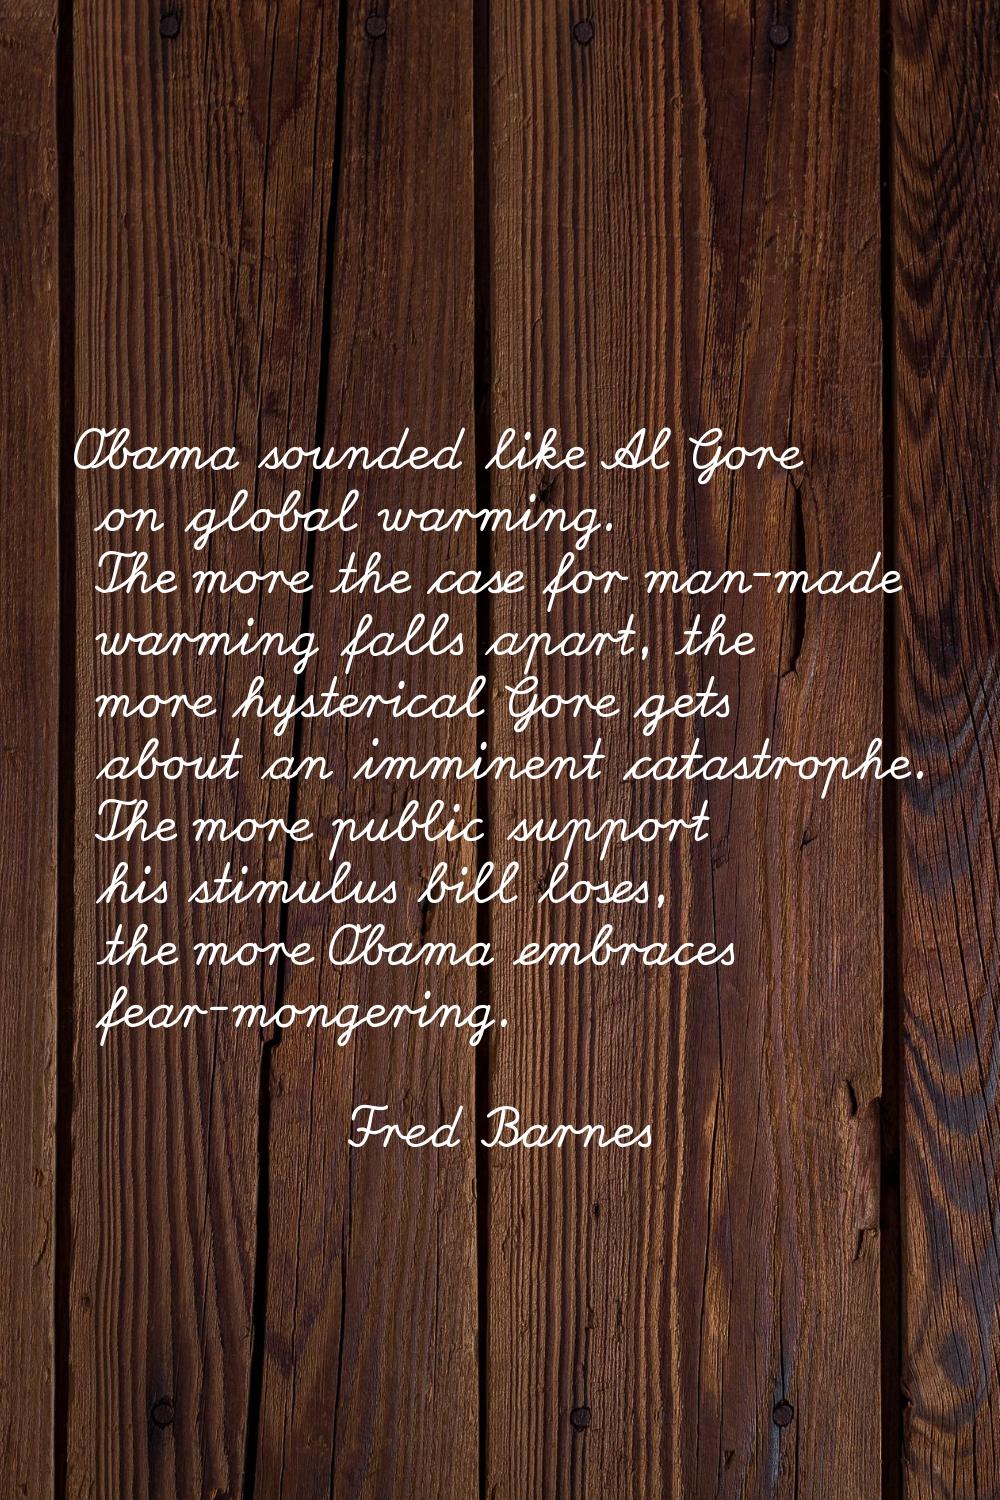 Obama sounded like Al Gore on global warming. The more the case for man-made warming falls apart, t